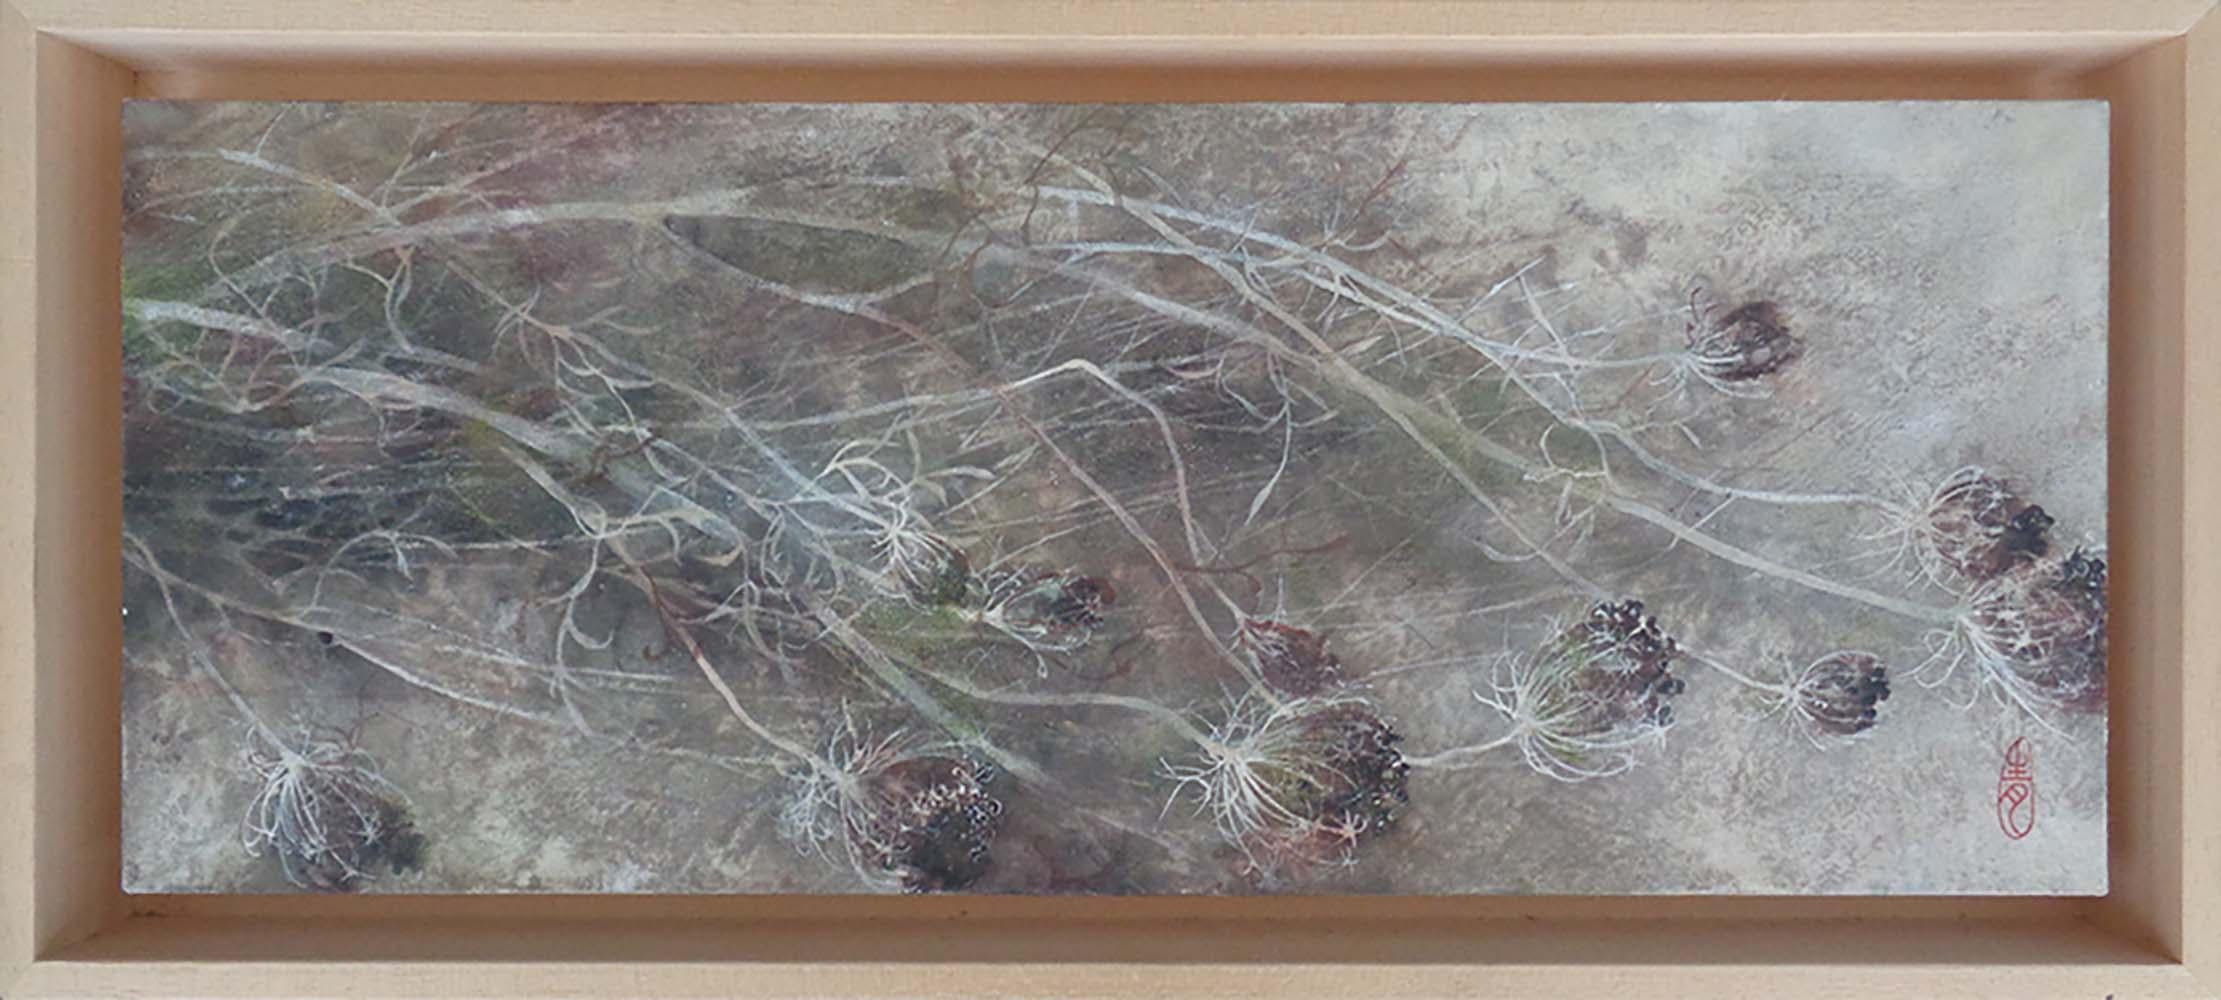 Umbel is a unique painting by contemporary artist Chen Yiching. The painting is made with mineral pigments on Japanese paper mounted on wood, dimensions are 20 × 50 cm (7.9 × 19.7 in). Dimensions of the framed (american wooden frame) artwork are 25